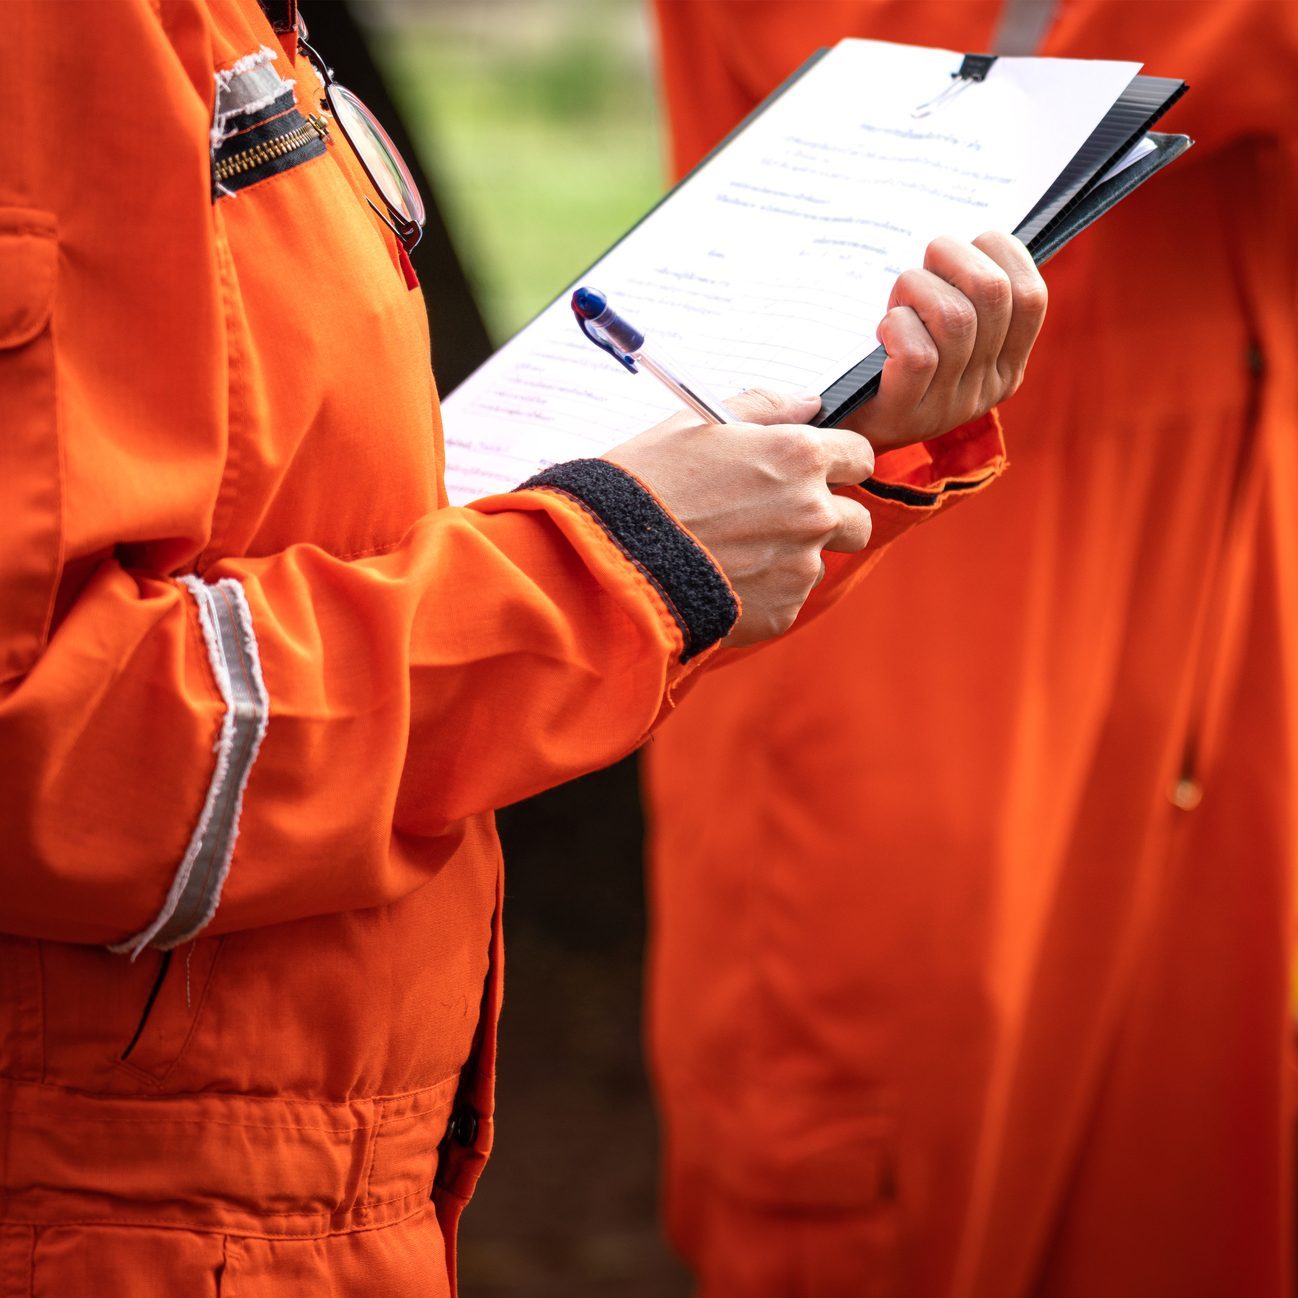 A safety supervisor in an orange jumpsuit is writing down on paper for taking note during safety audit at the operation work site